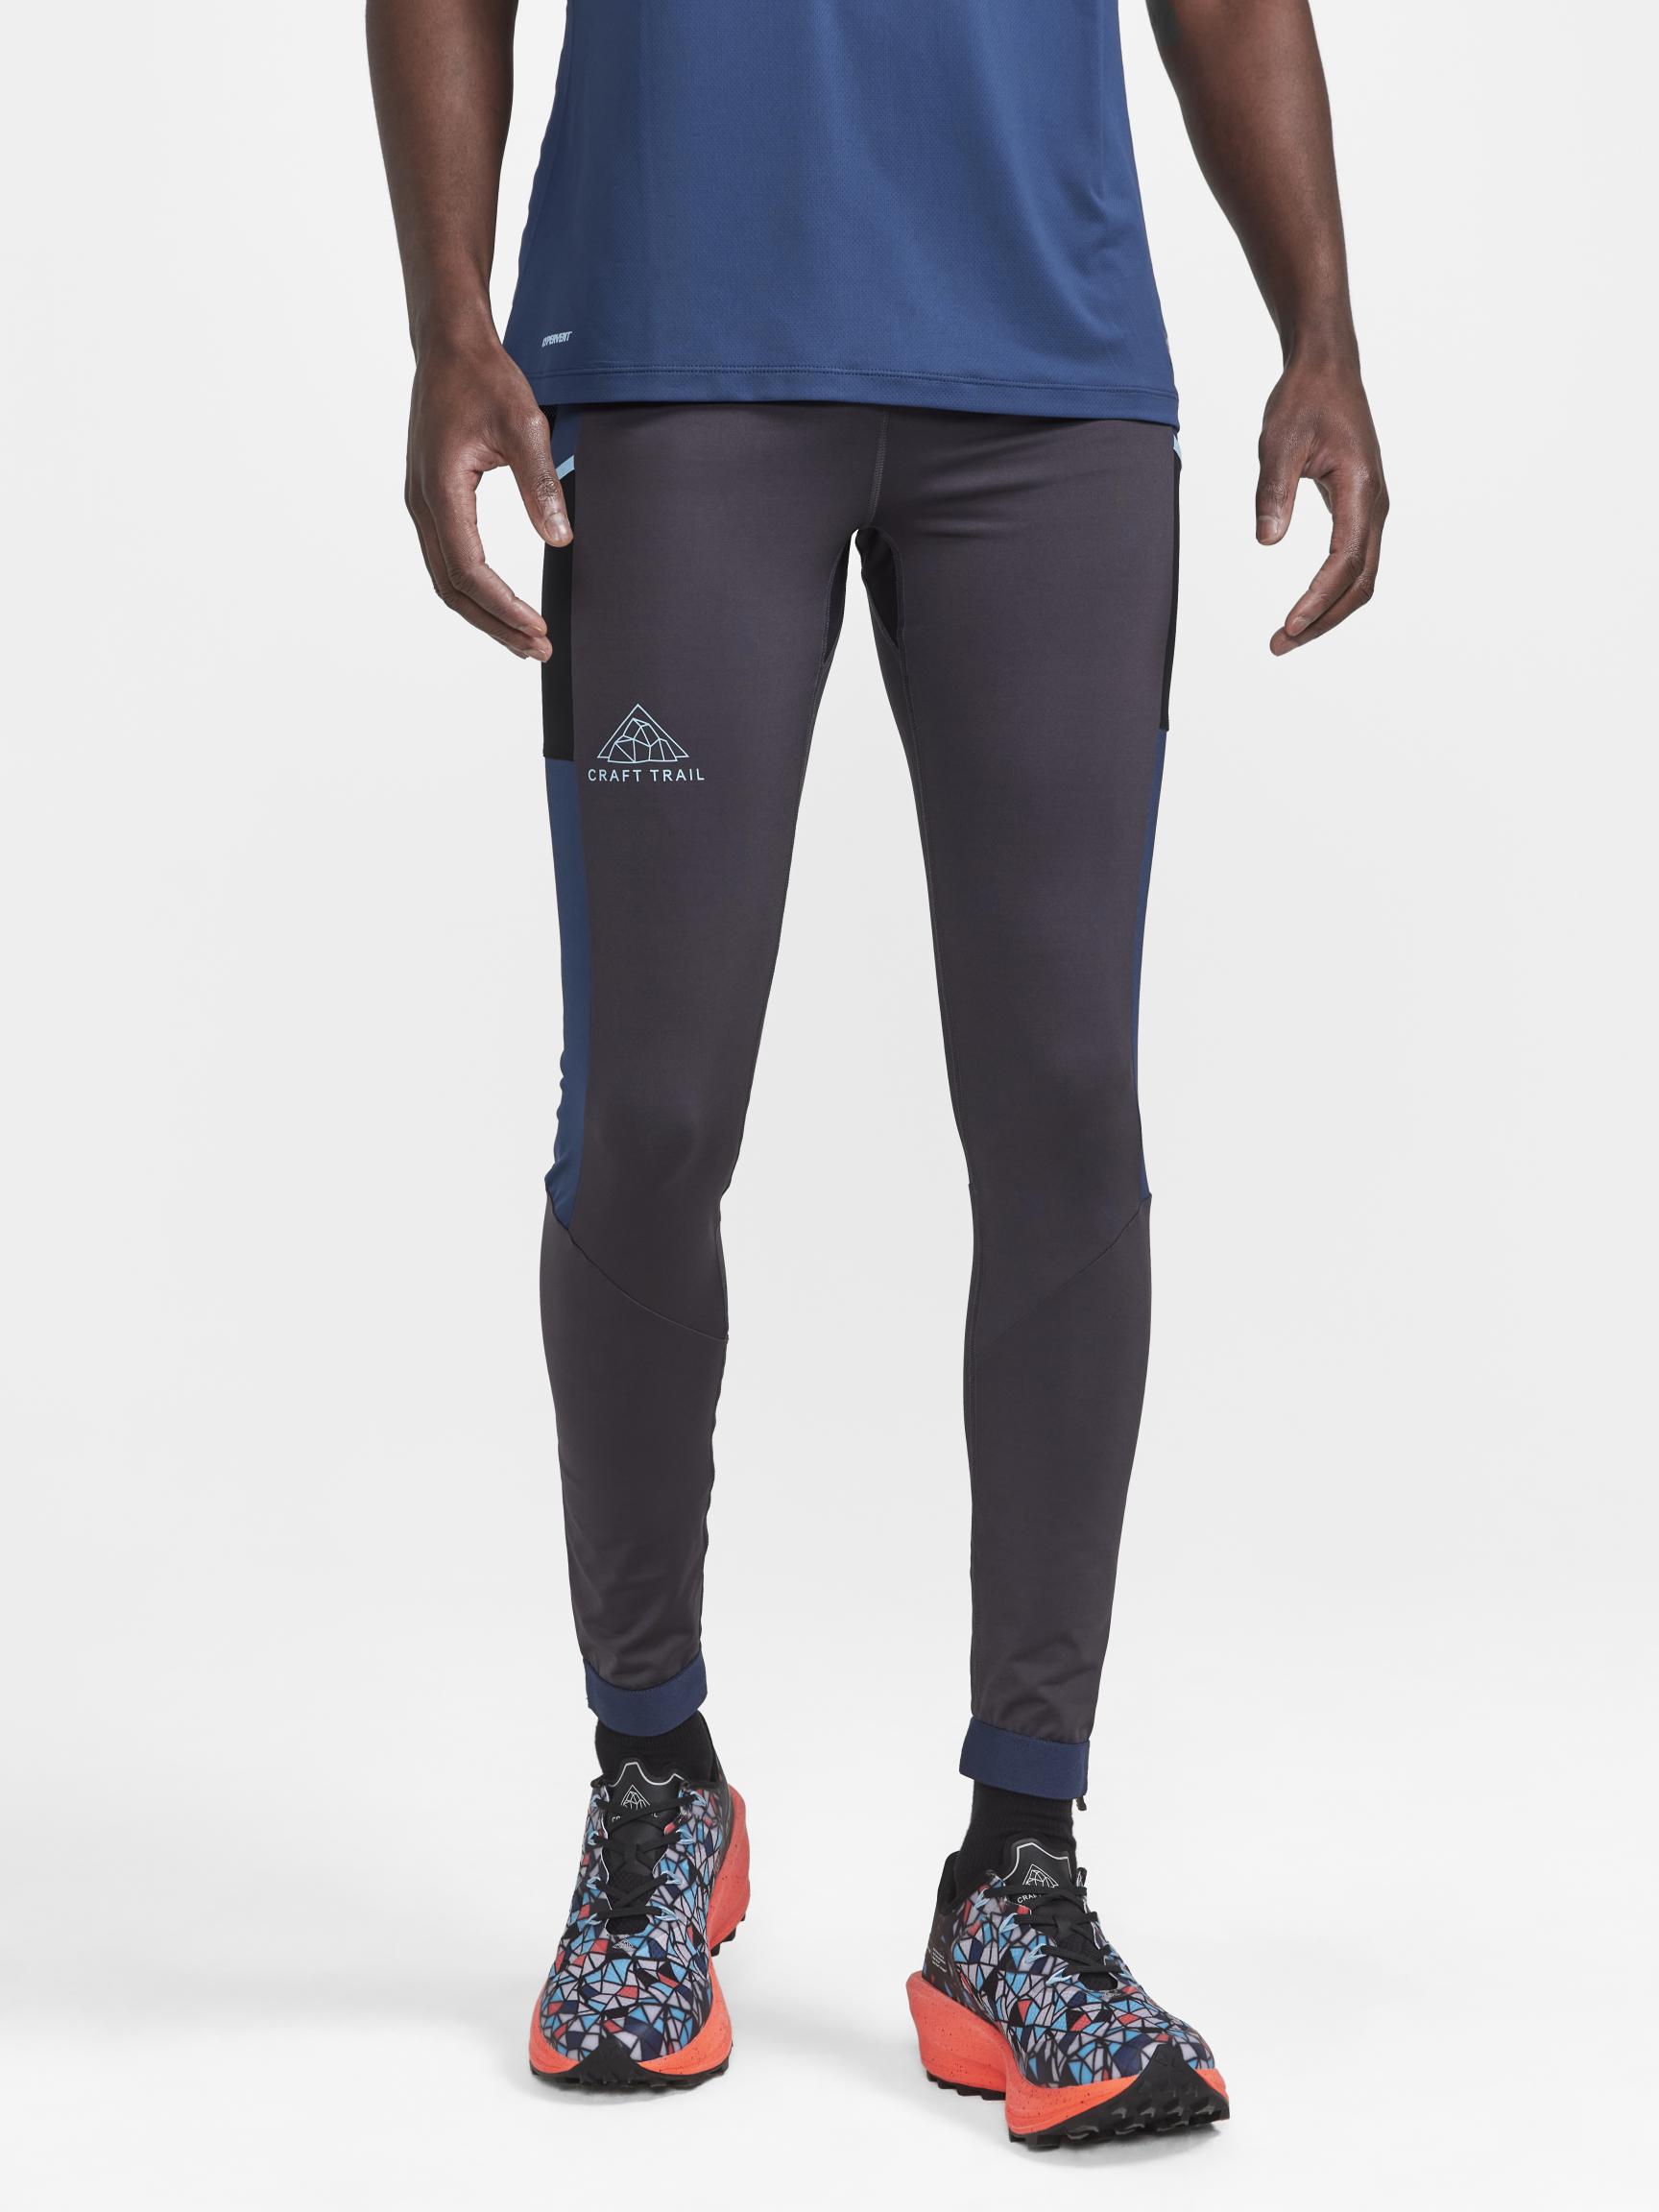 Athletic Works Men's Running Tights 